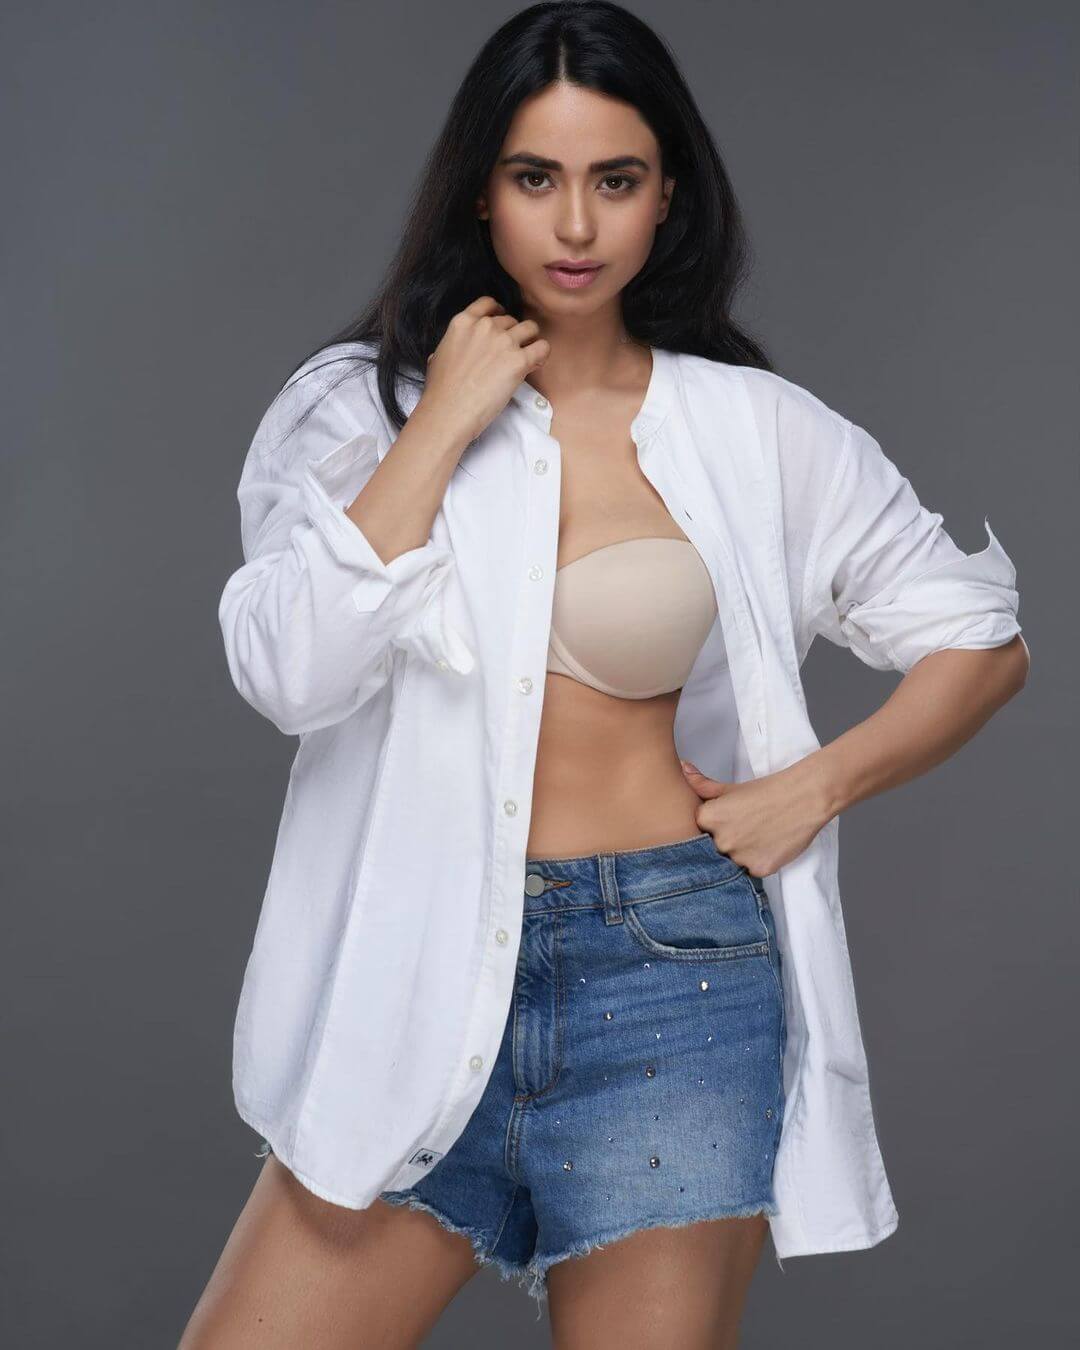 Soundarya Flaunting Her Figure In Blue Shorts With White Baggy Shirt & Beige Bralette